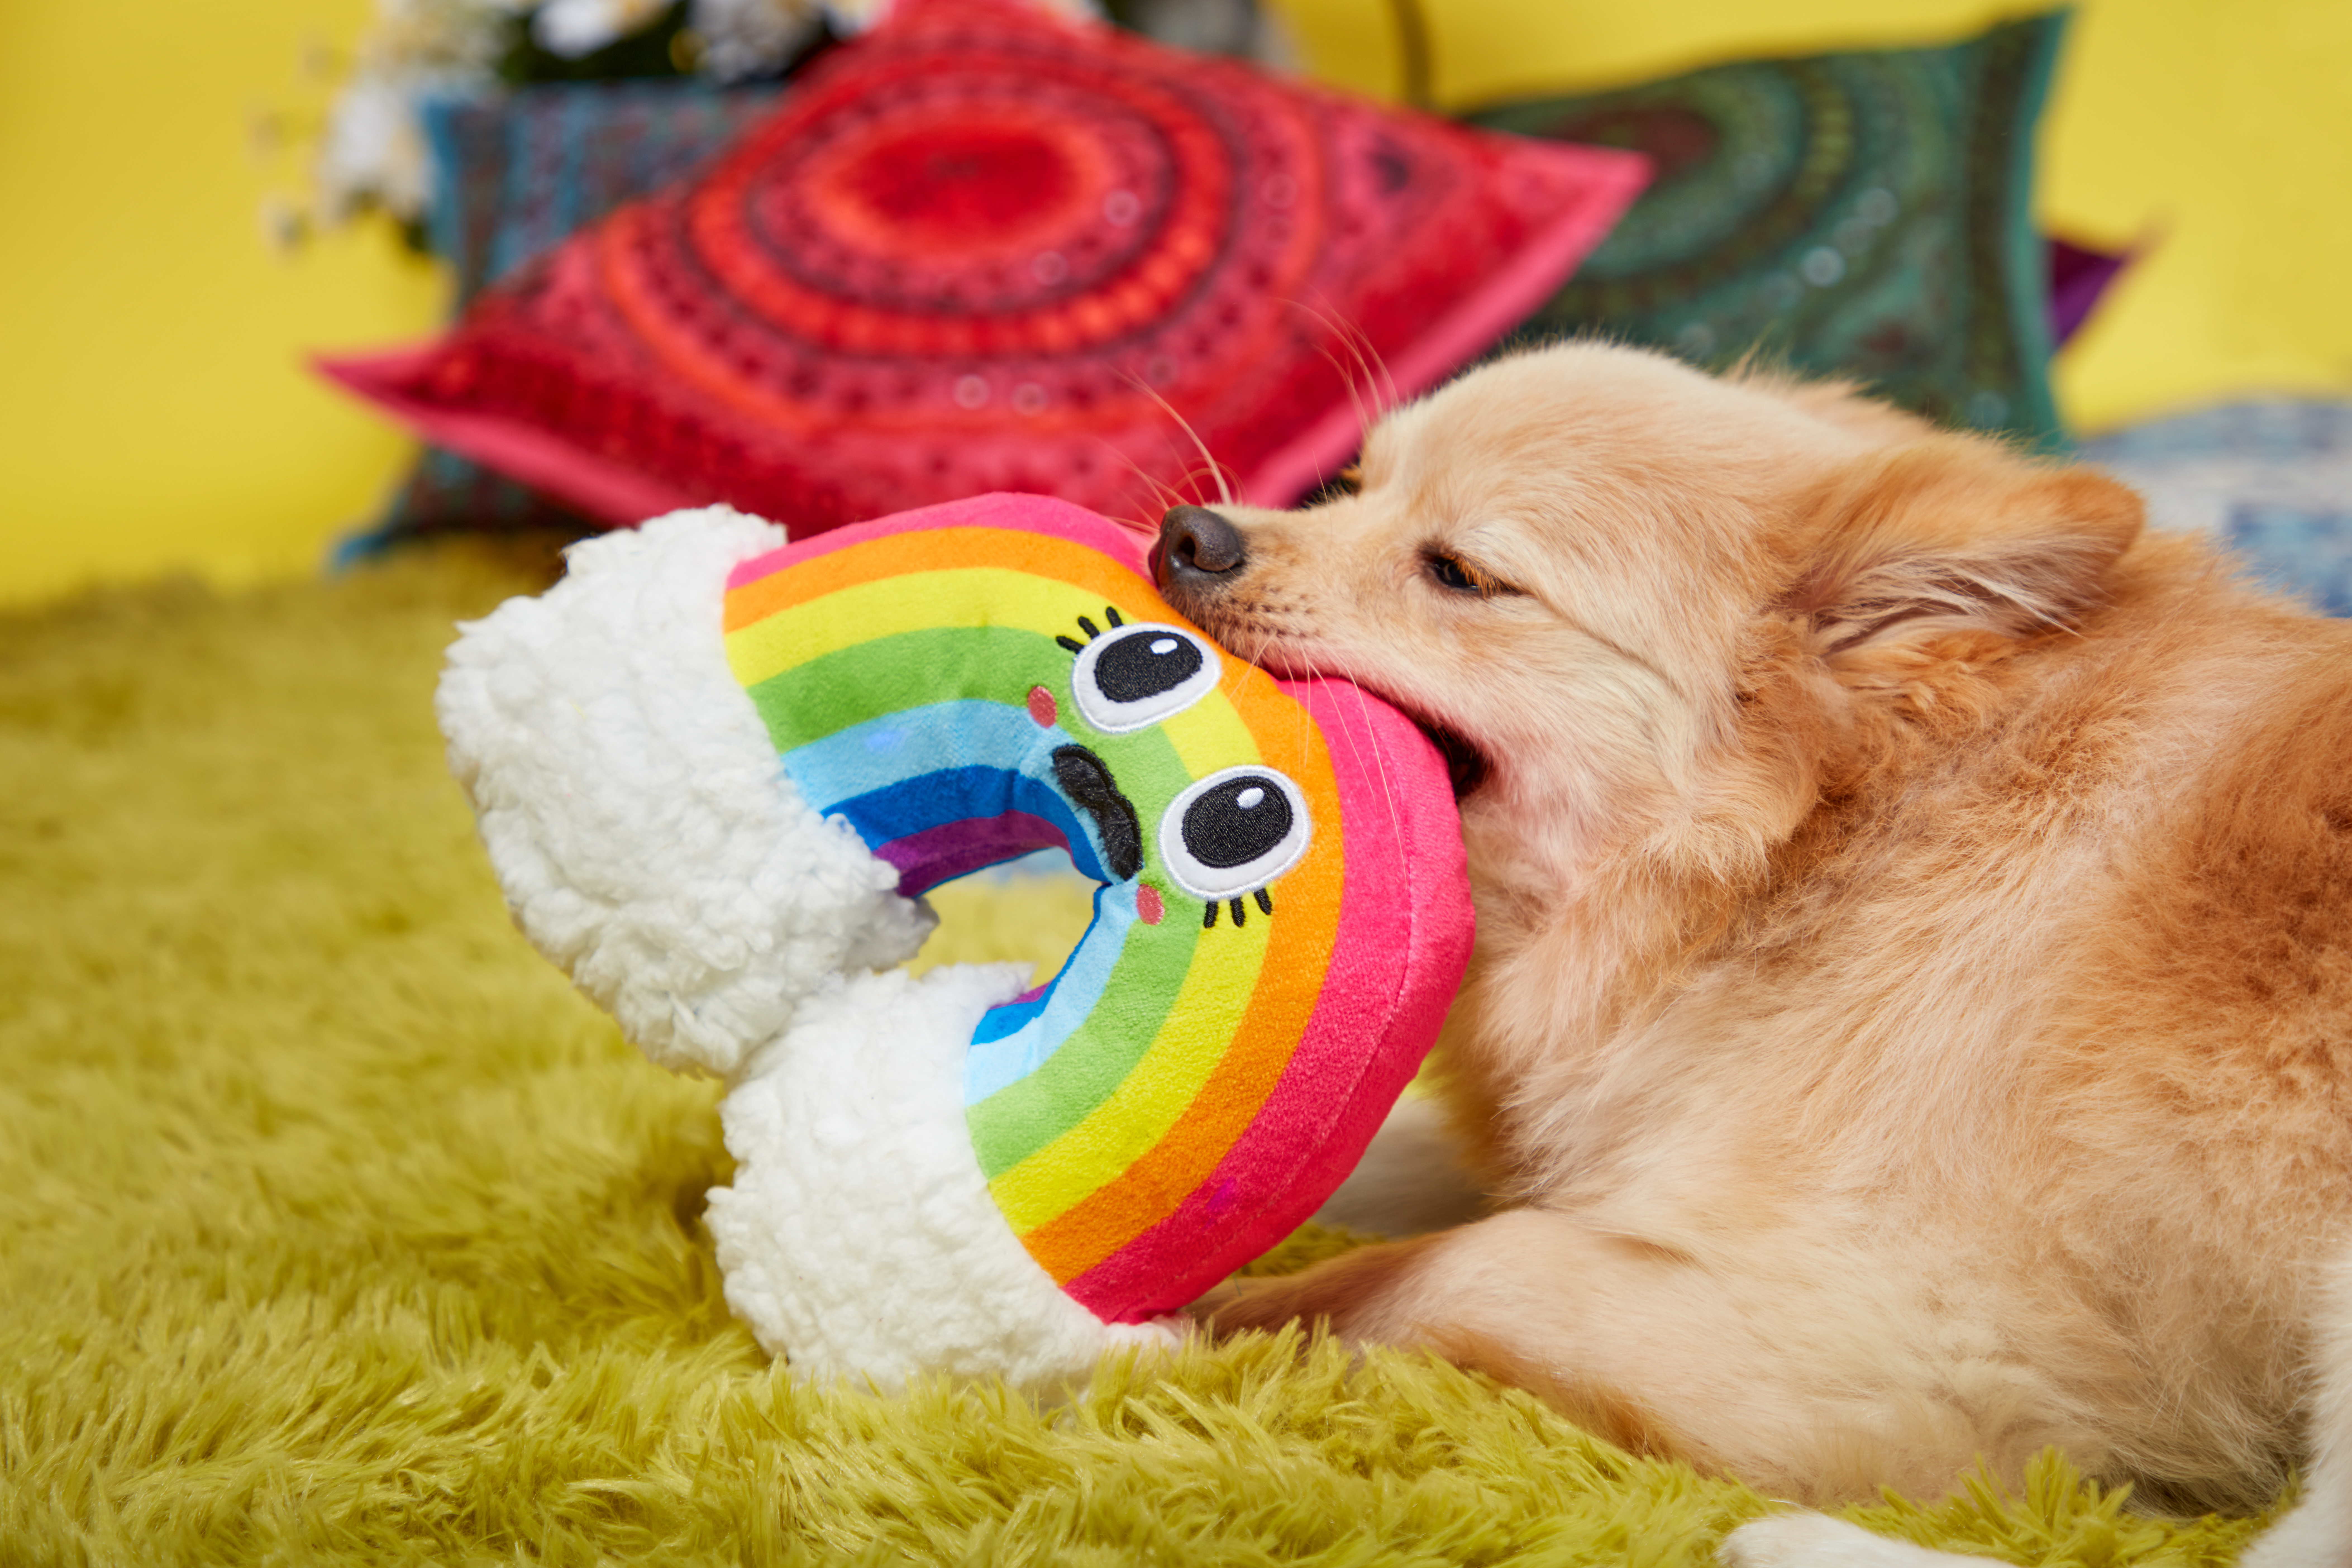 Right On! The BarkBox “Peace & Fluff” Collection Is The Best Thing Since Sliced Bread